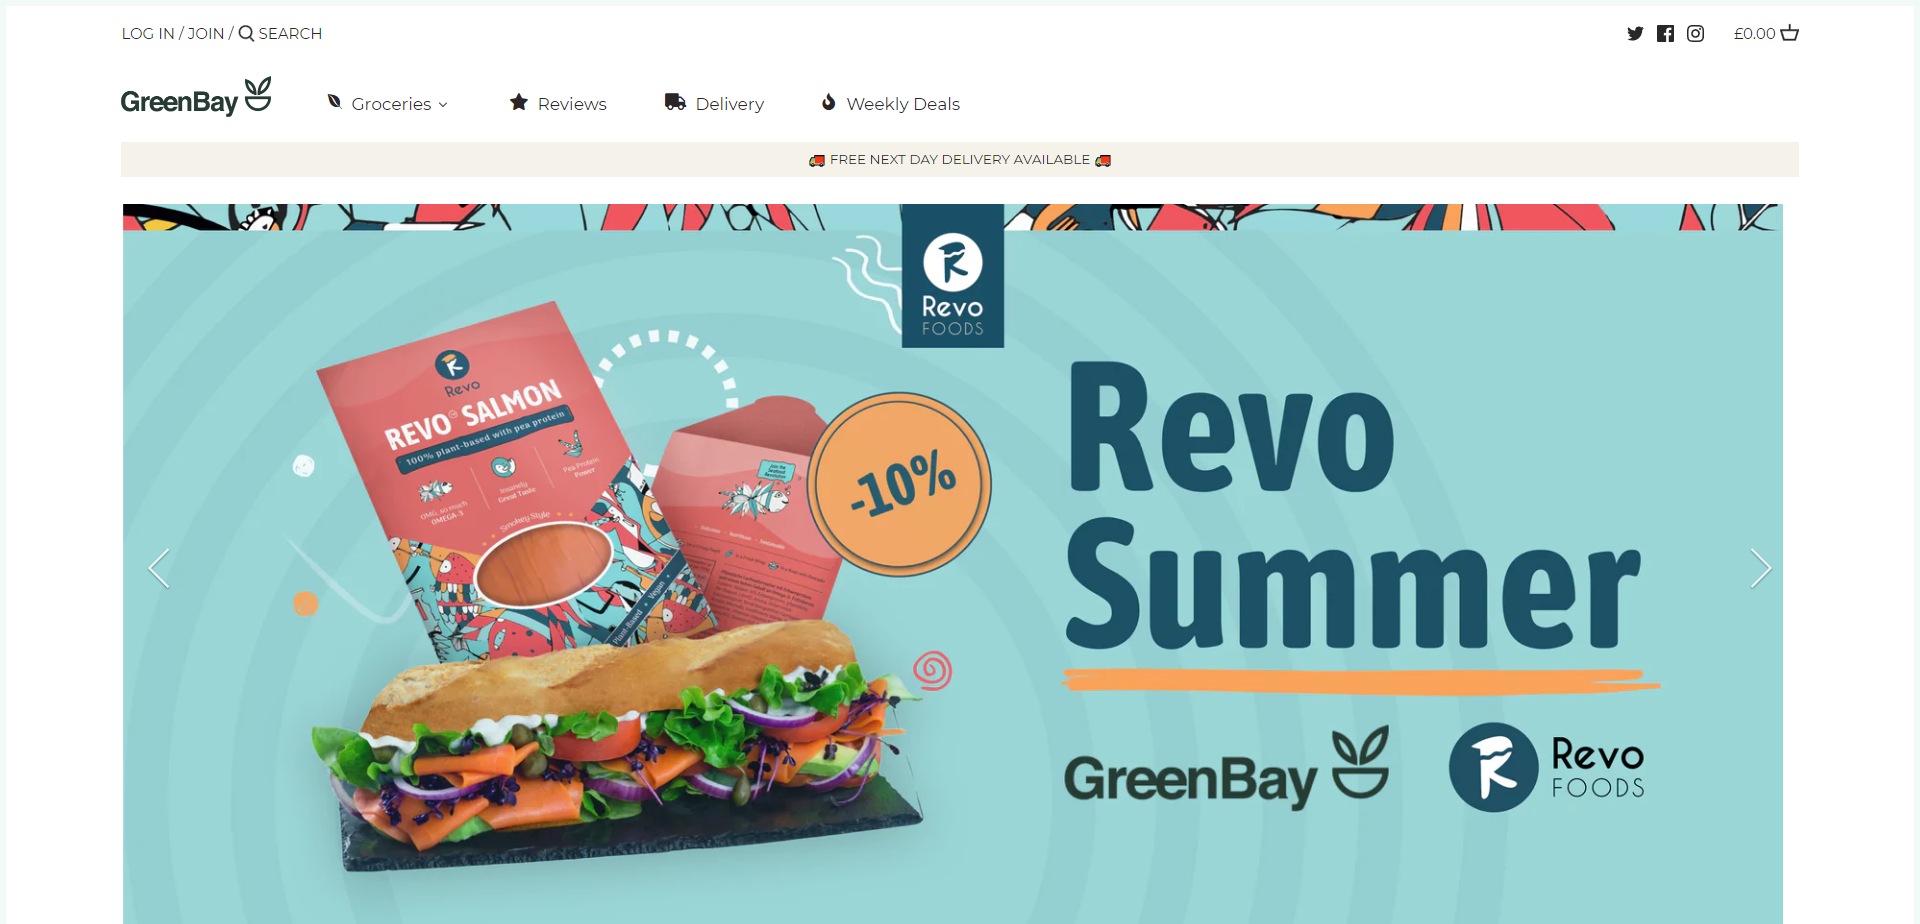 Referral Landing Page for Green Bay Supermarket